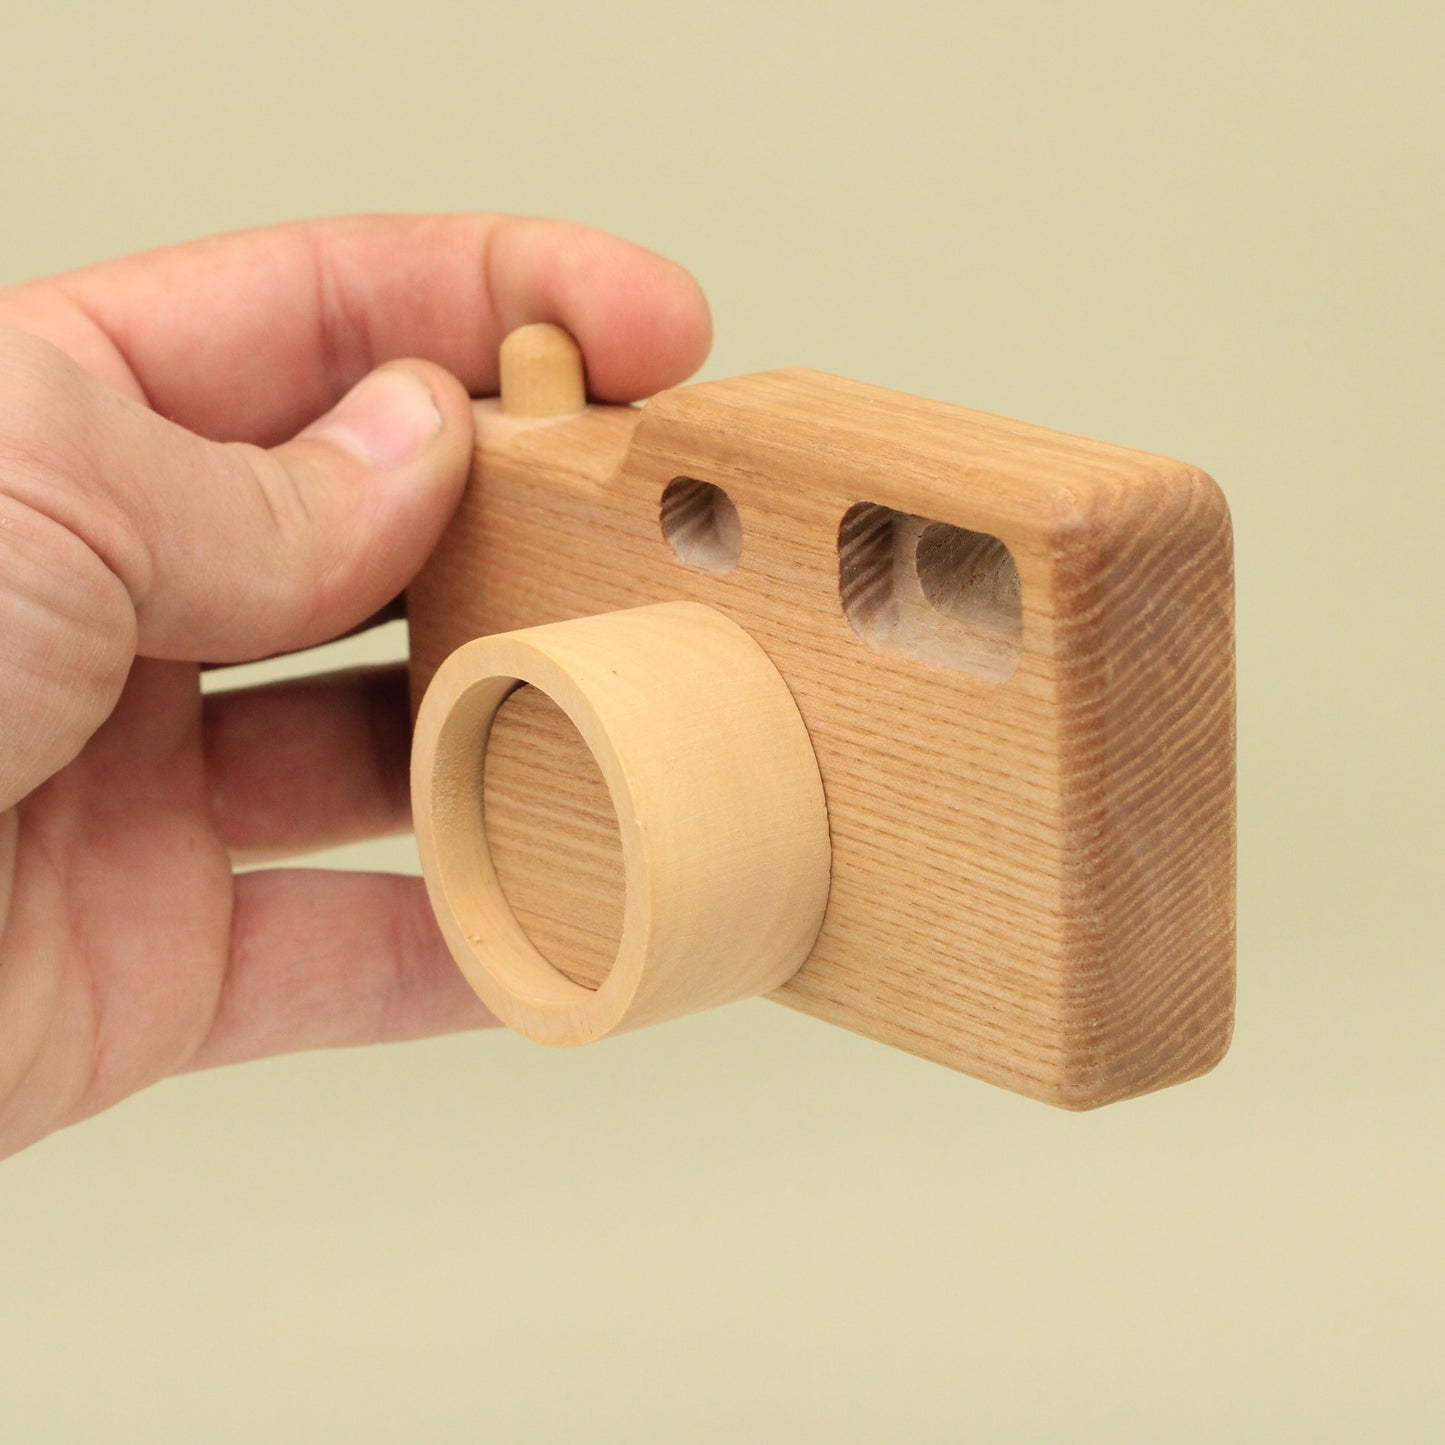 Lotes Toys Wooden Camera II